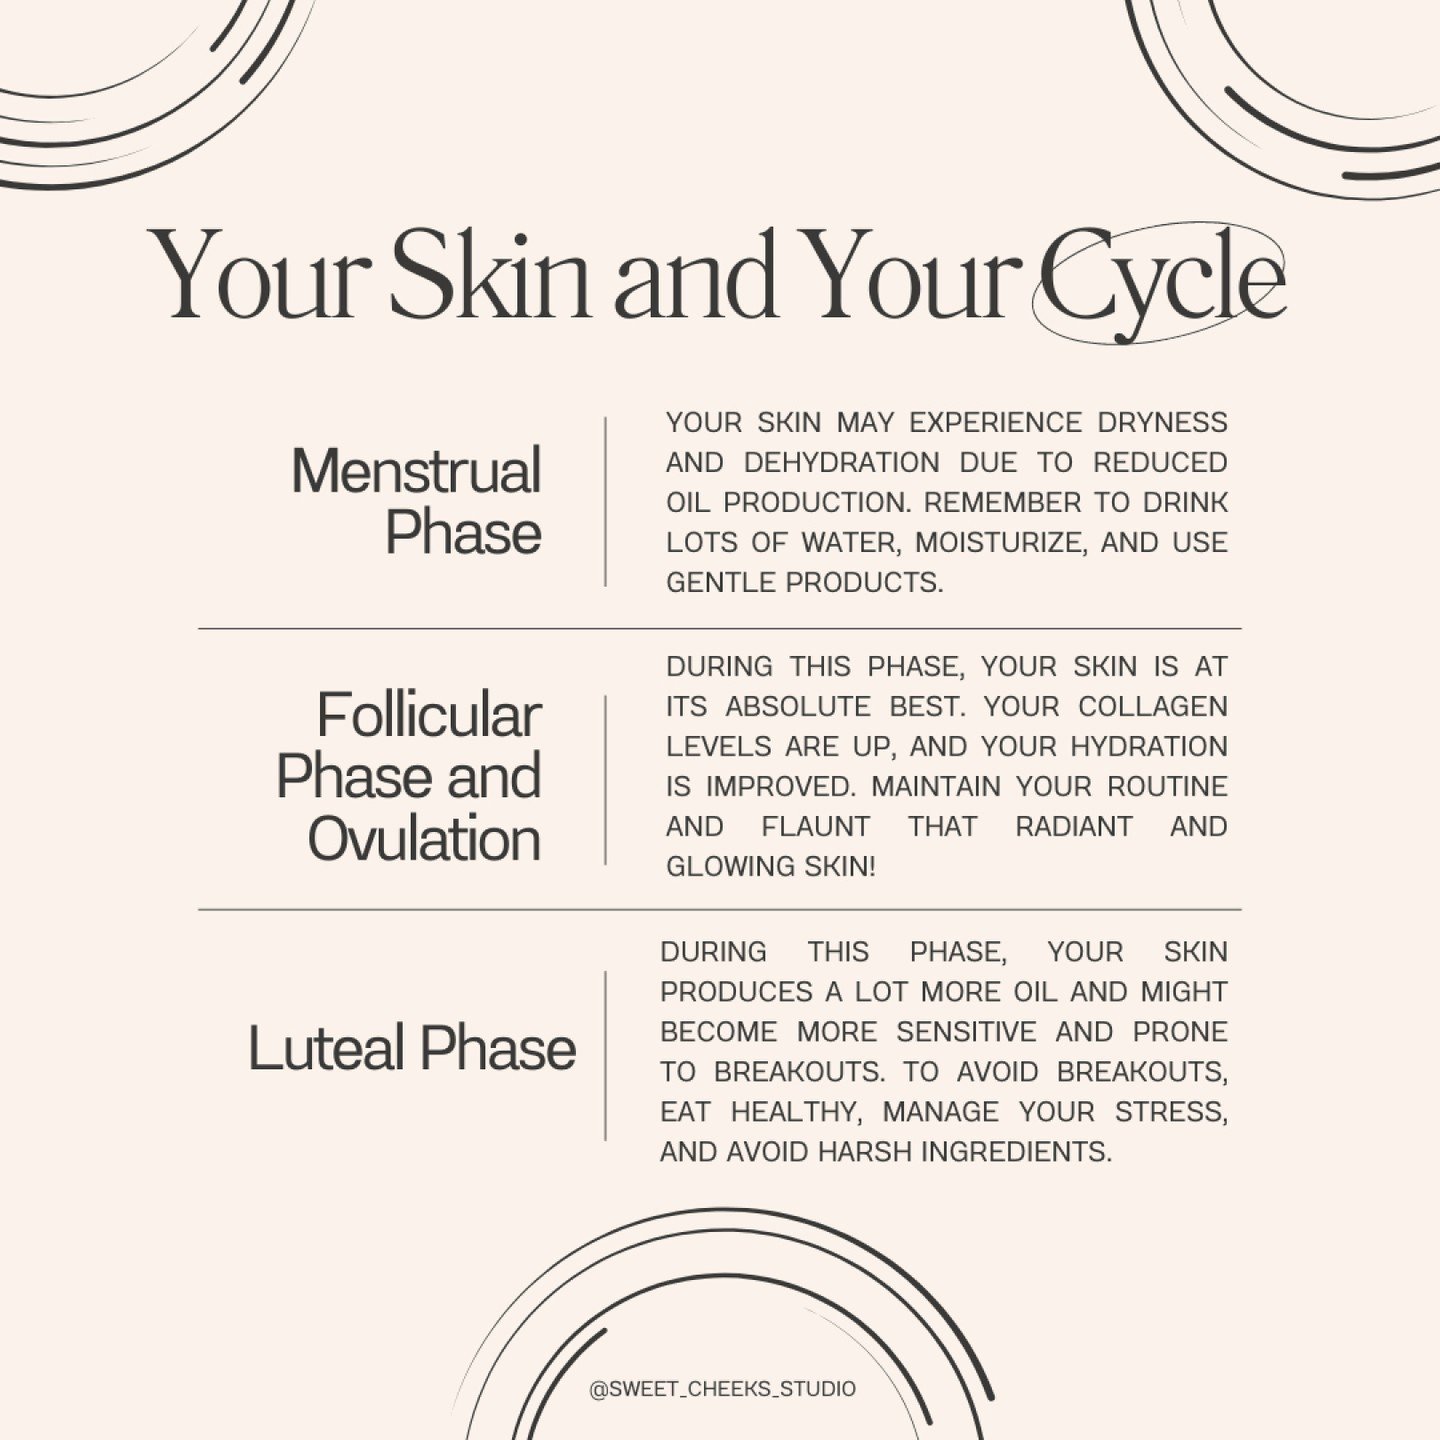 Everyone's cycle is different.  However, paying attention to what happens to your skin during different phases of your cycle is important for everyones skincare! :)
*
*
*
*
*
#temeculaskincare #temeculafacials #facials #temeculawaxing #waxing #beauty